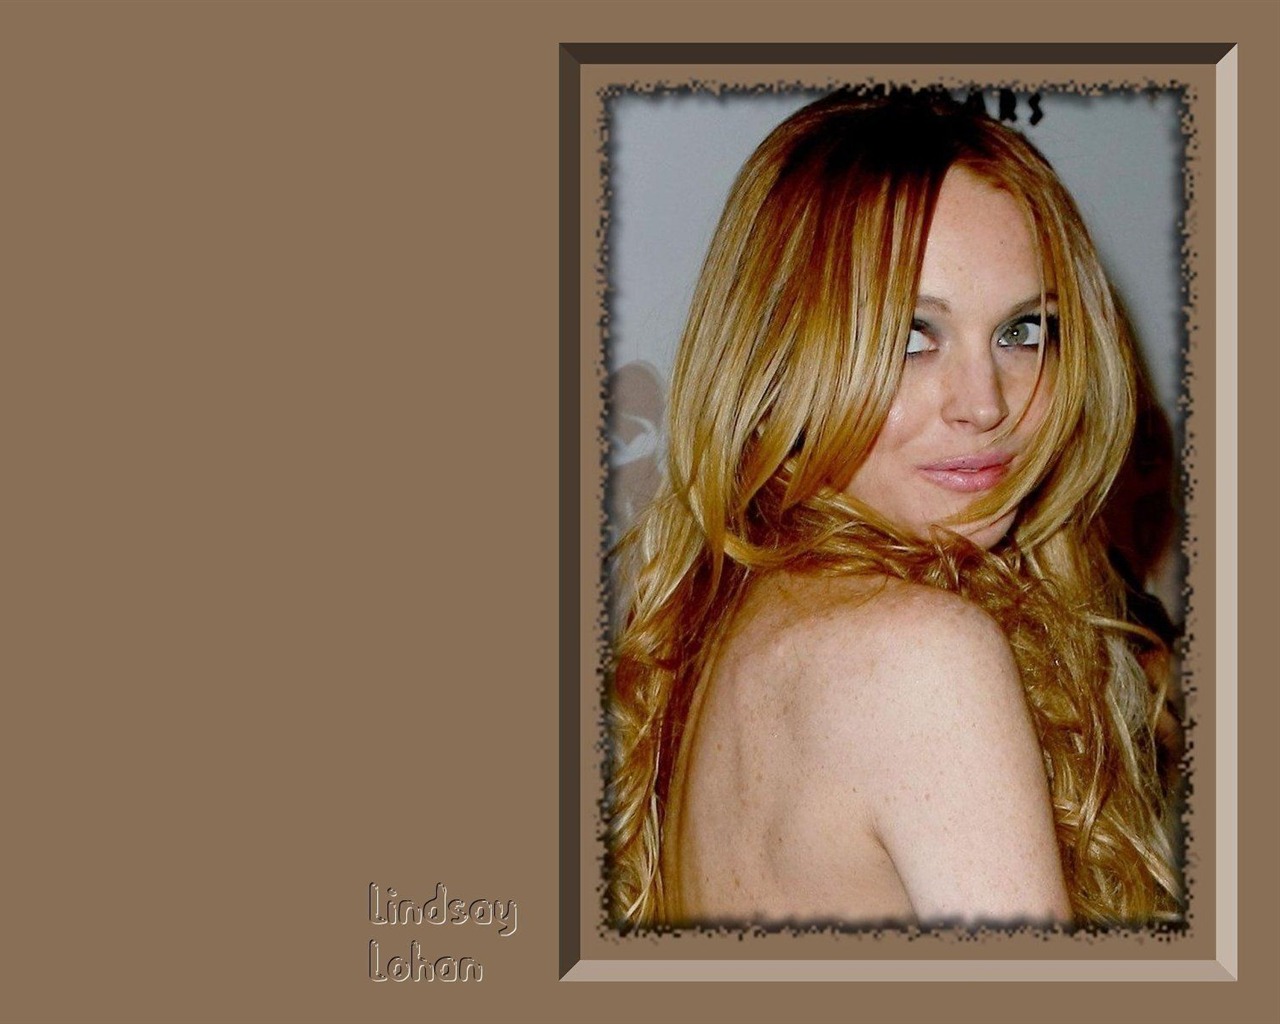 Lindsay Lohan #016 - 1280x1024 Wallpapers Pictures Photos Images